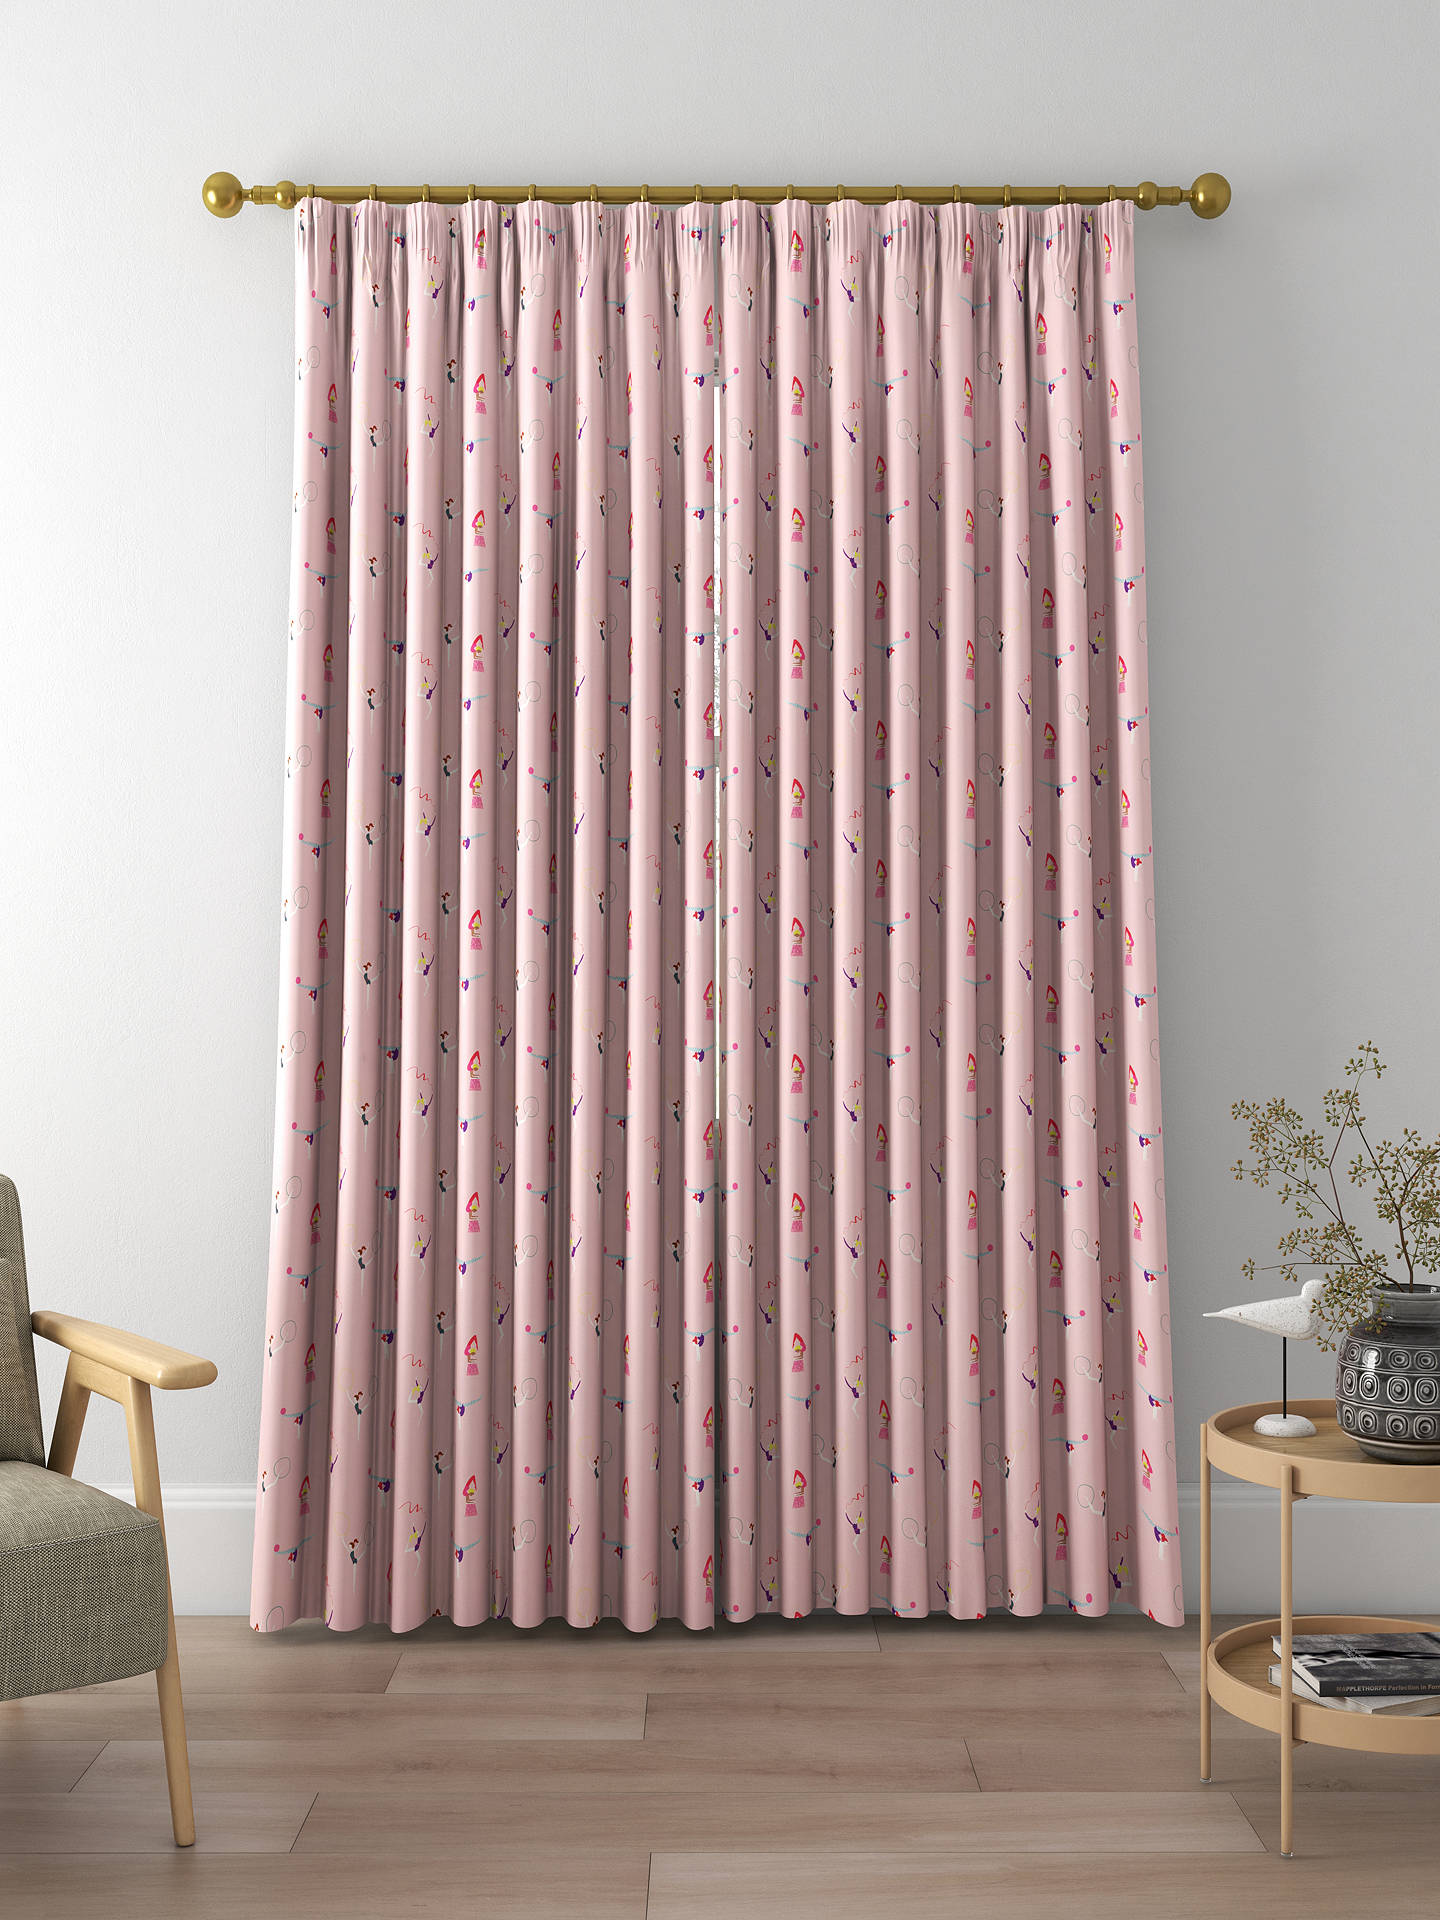 Harlequin Balancing Made to Measure Curtains, Blossom/Raspberry